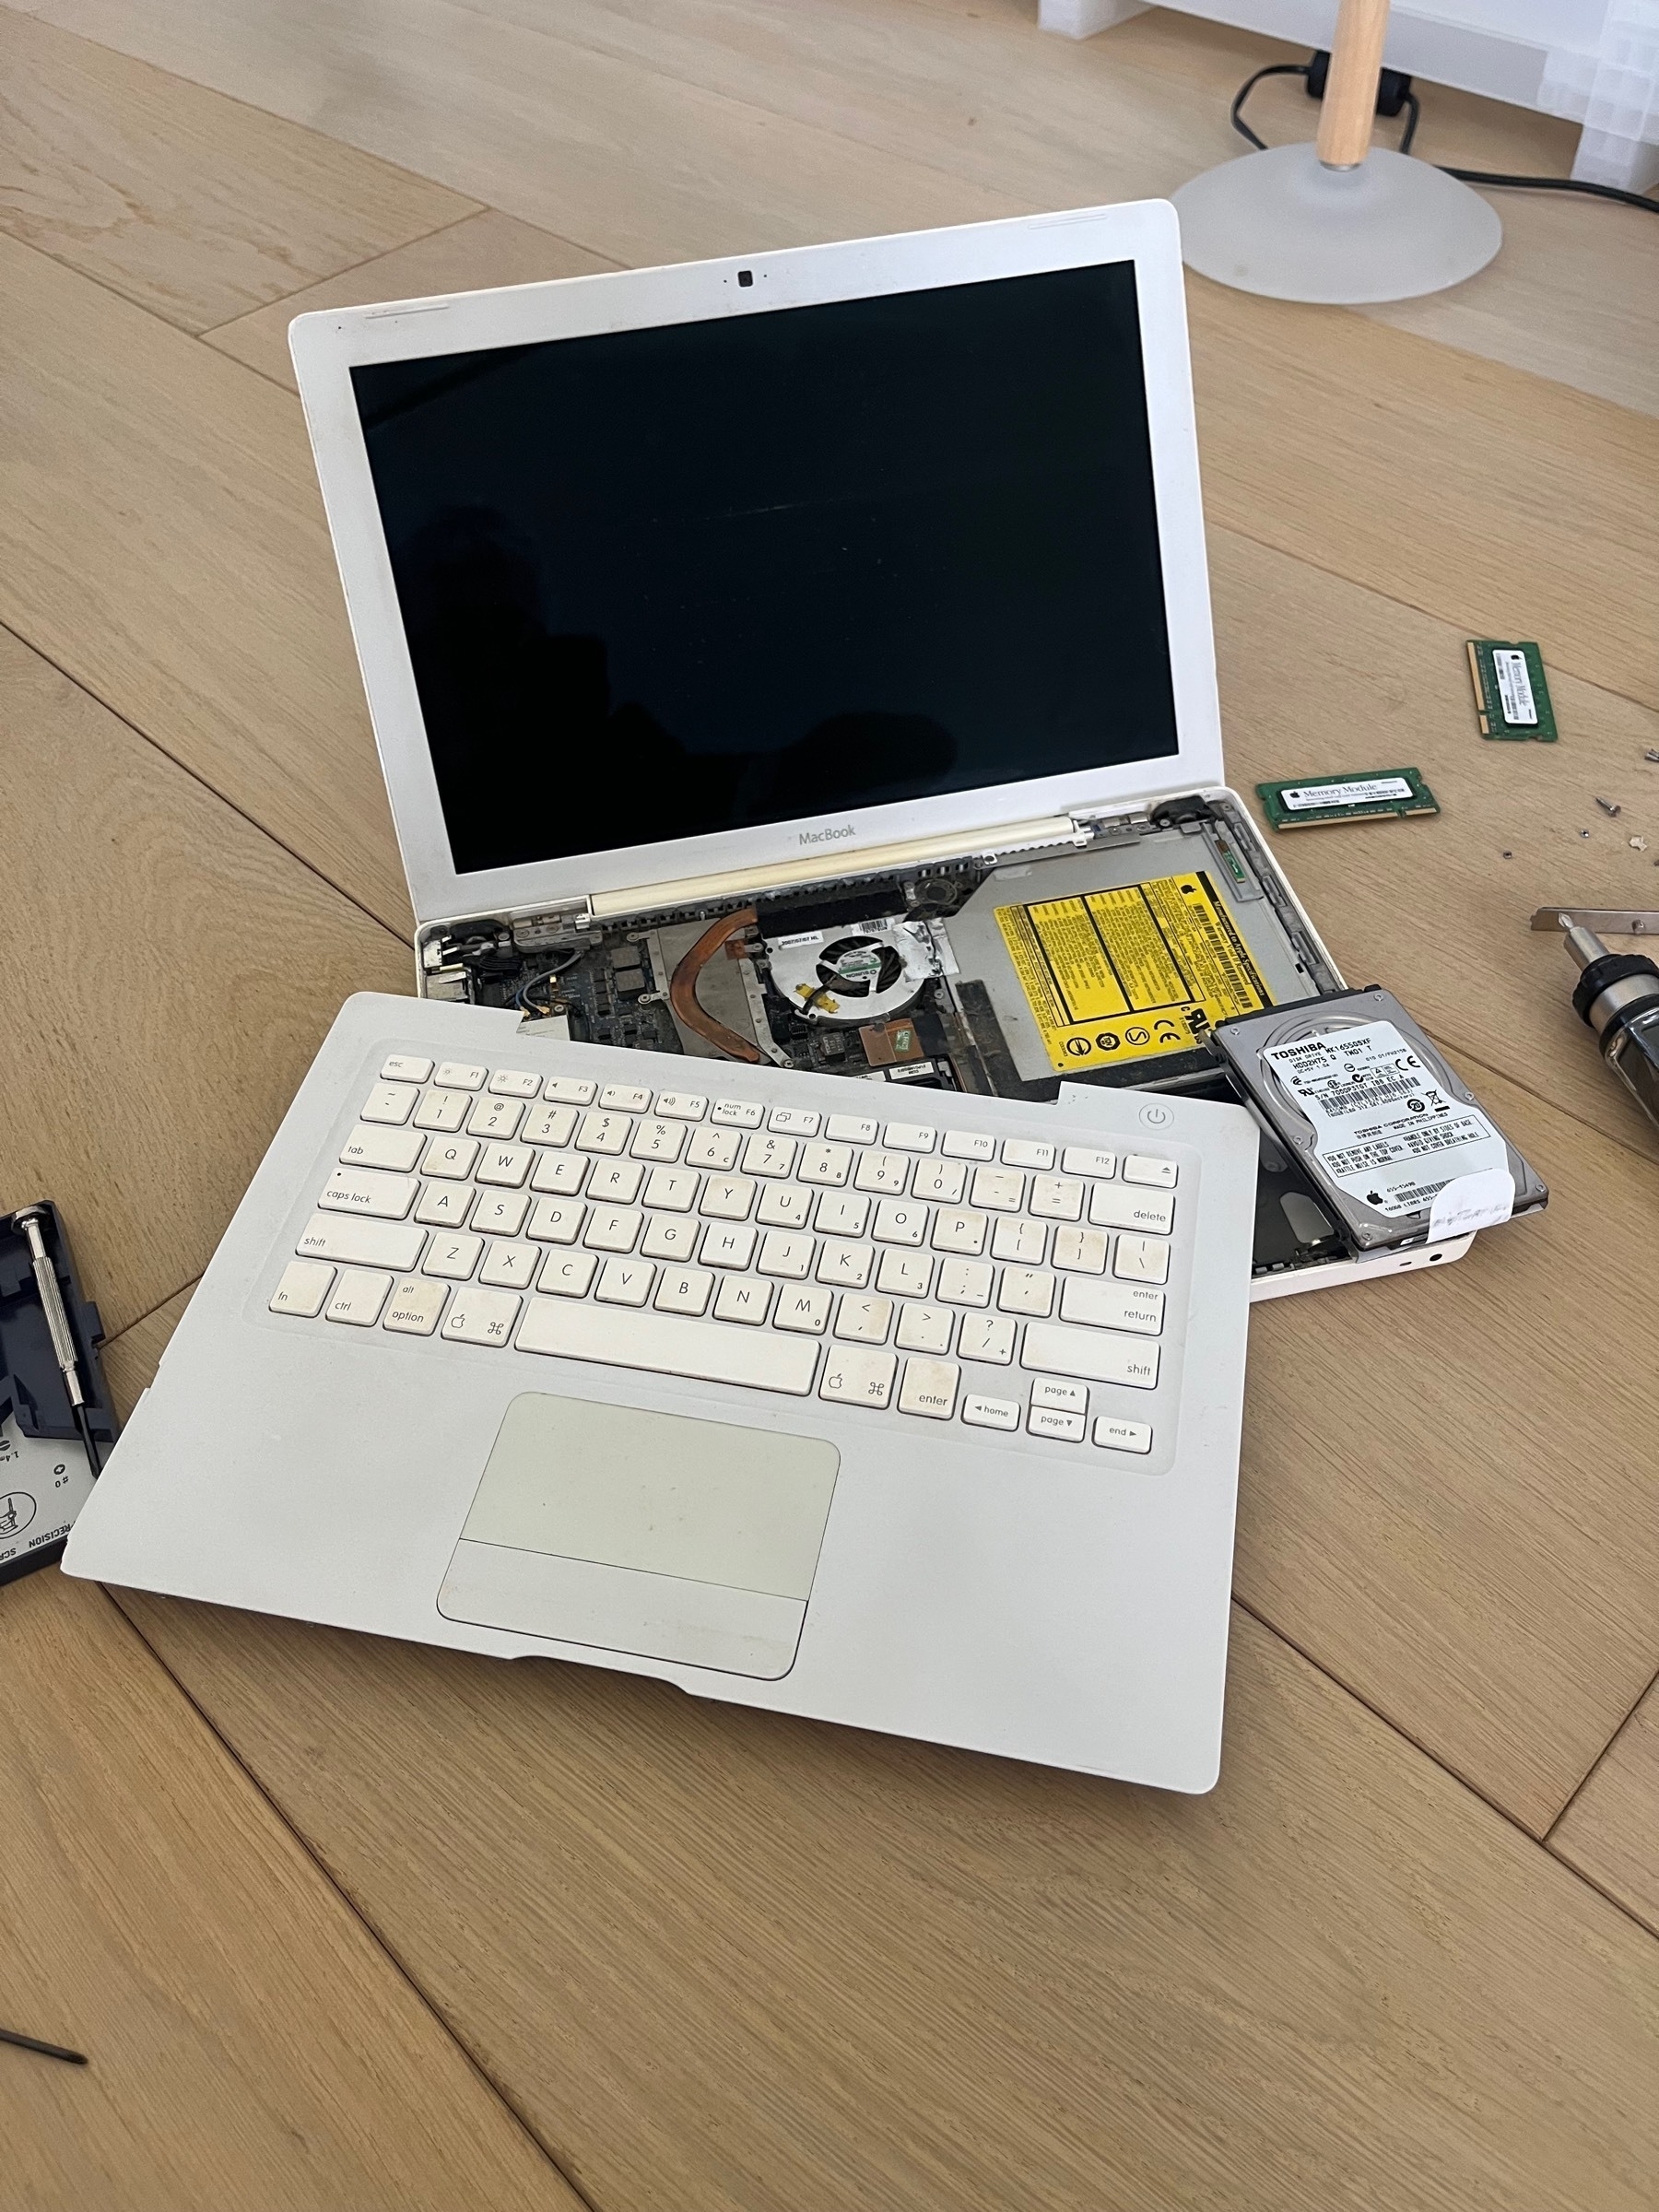 Dismantling an old white Apple laptop on the floor. The keyboard is off, the hard drive out, the keyboard lies at an angle. Screws, screwdrivers and other bits and pieces lie around